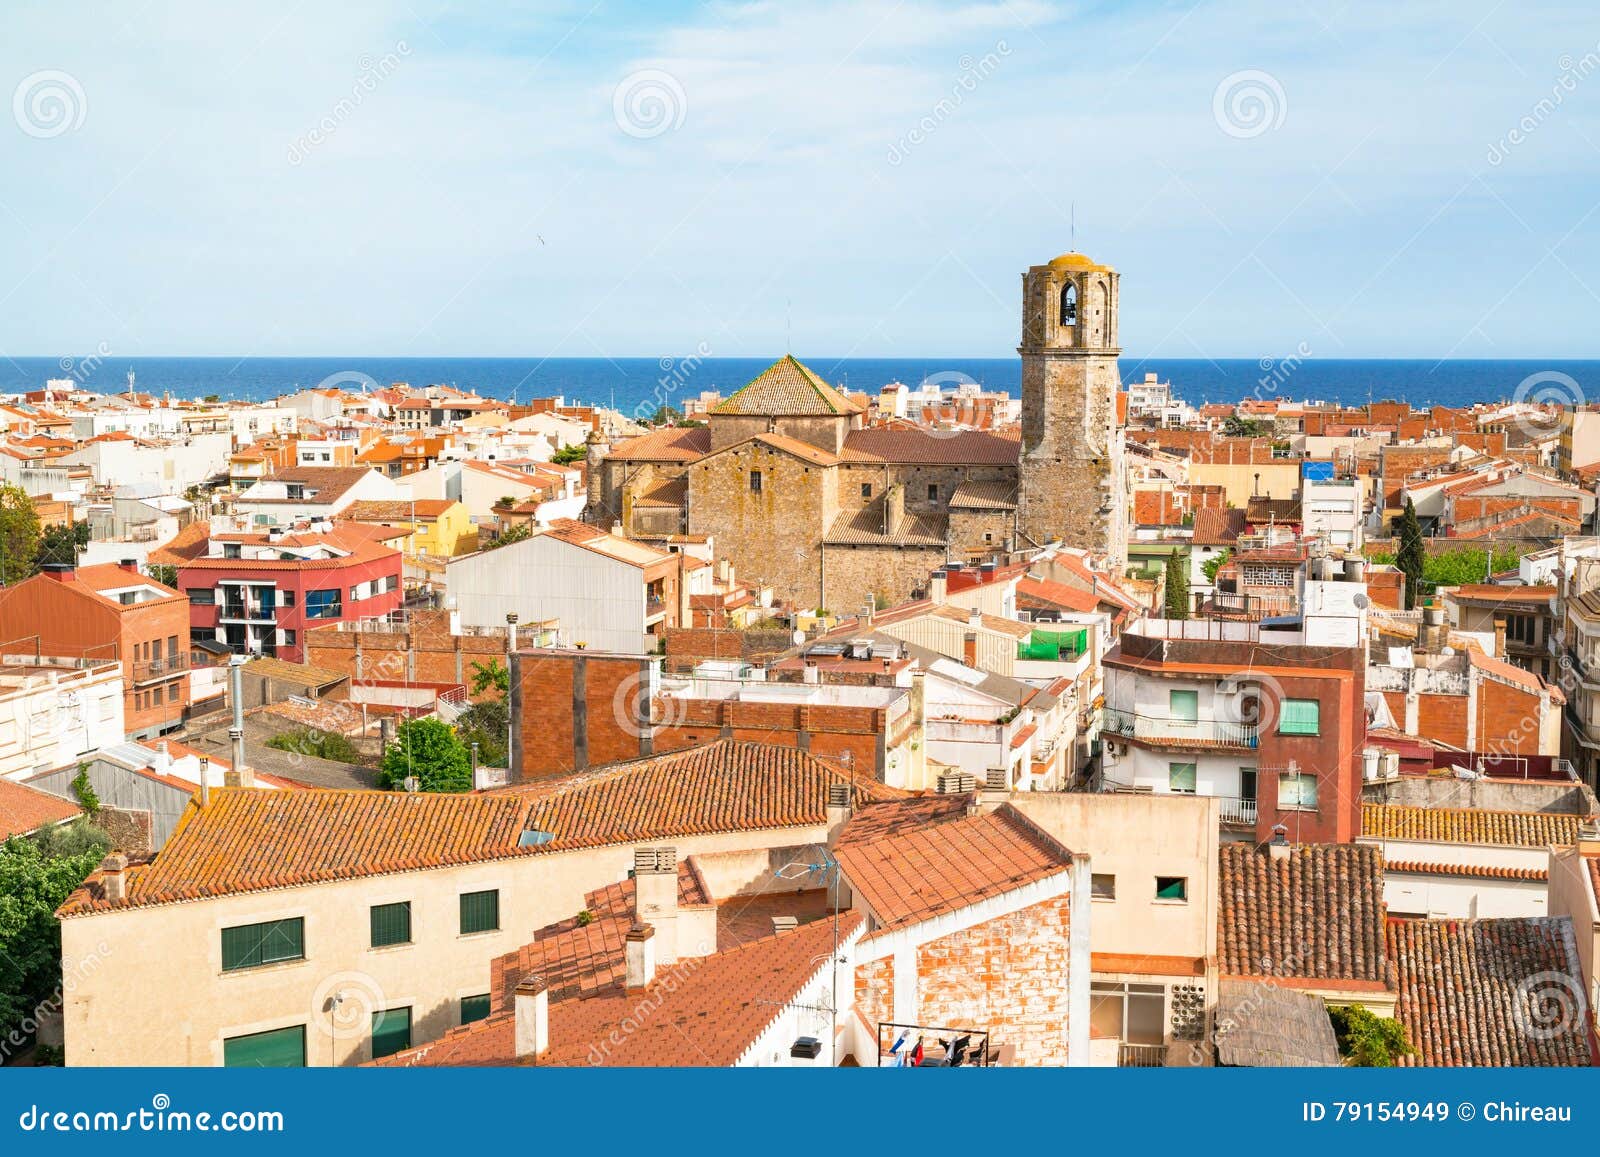 view over the roofs of old town malgrat de mar spain from the hill with mediterranean sea in the background